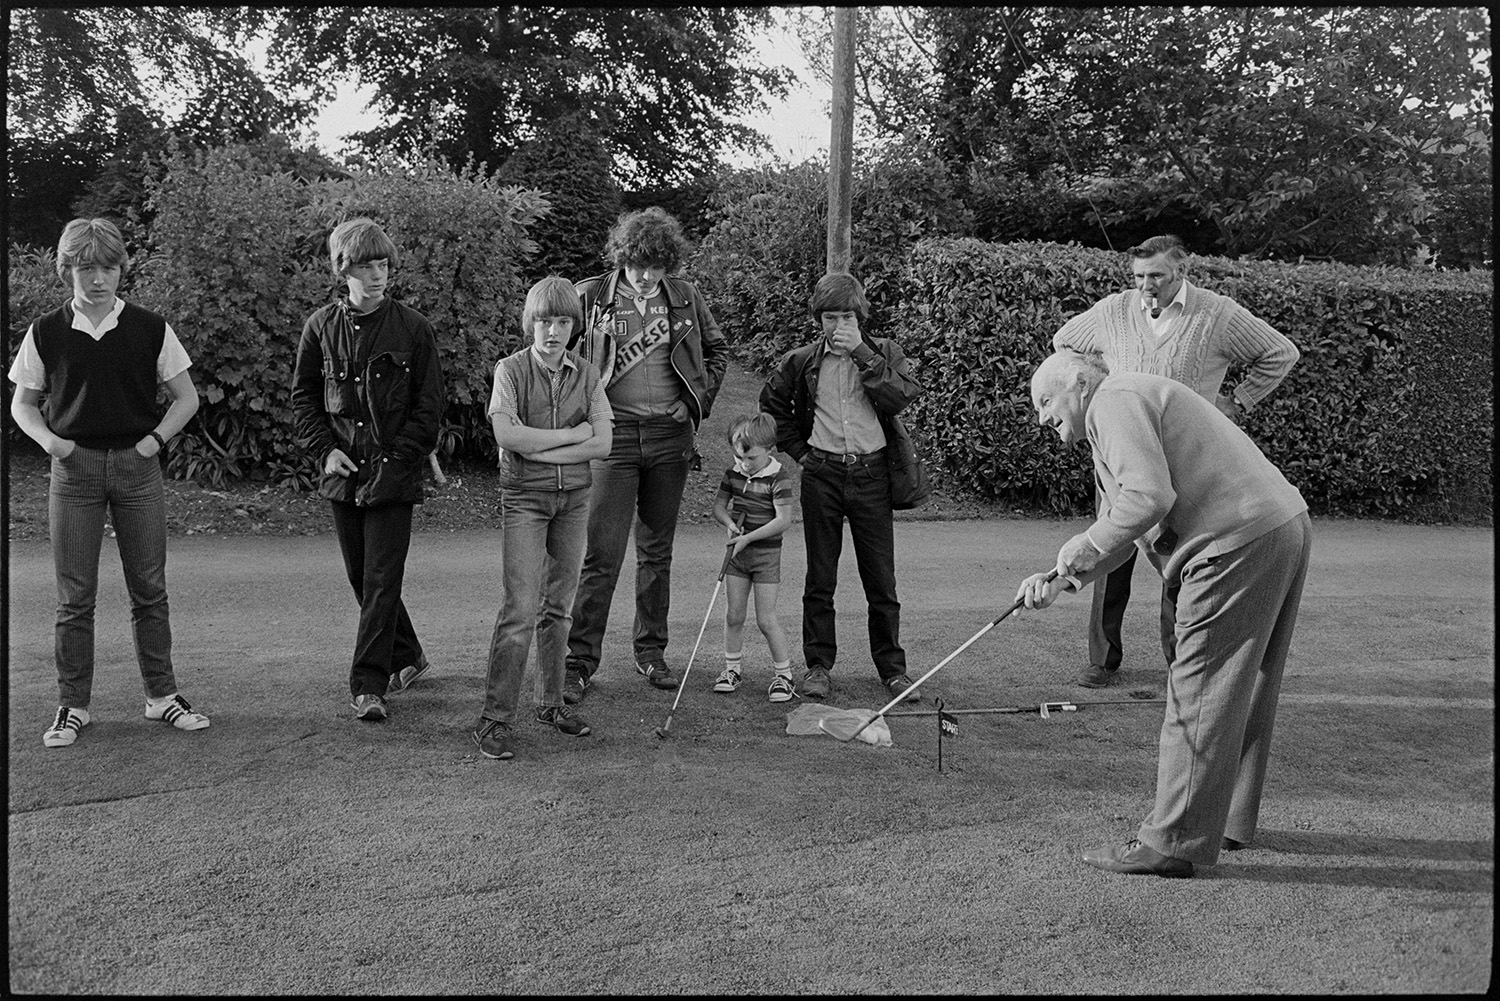 Sideshows at garden fete, bowls, hoop la, billiards, golf.
[Two men playing golf on the lawn at a fete at the Old Rectory, Merton with a line of children and teenagers watching. One of the men is smoking a pipe.]